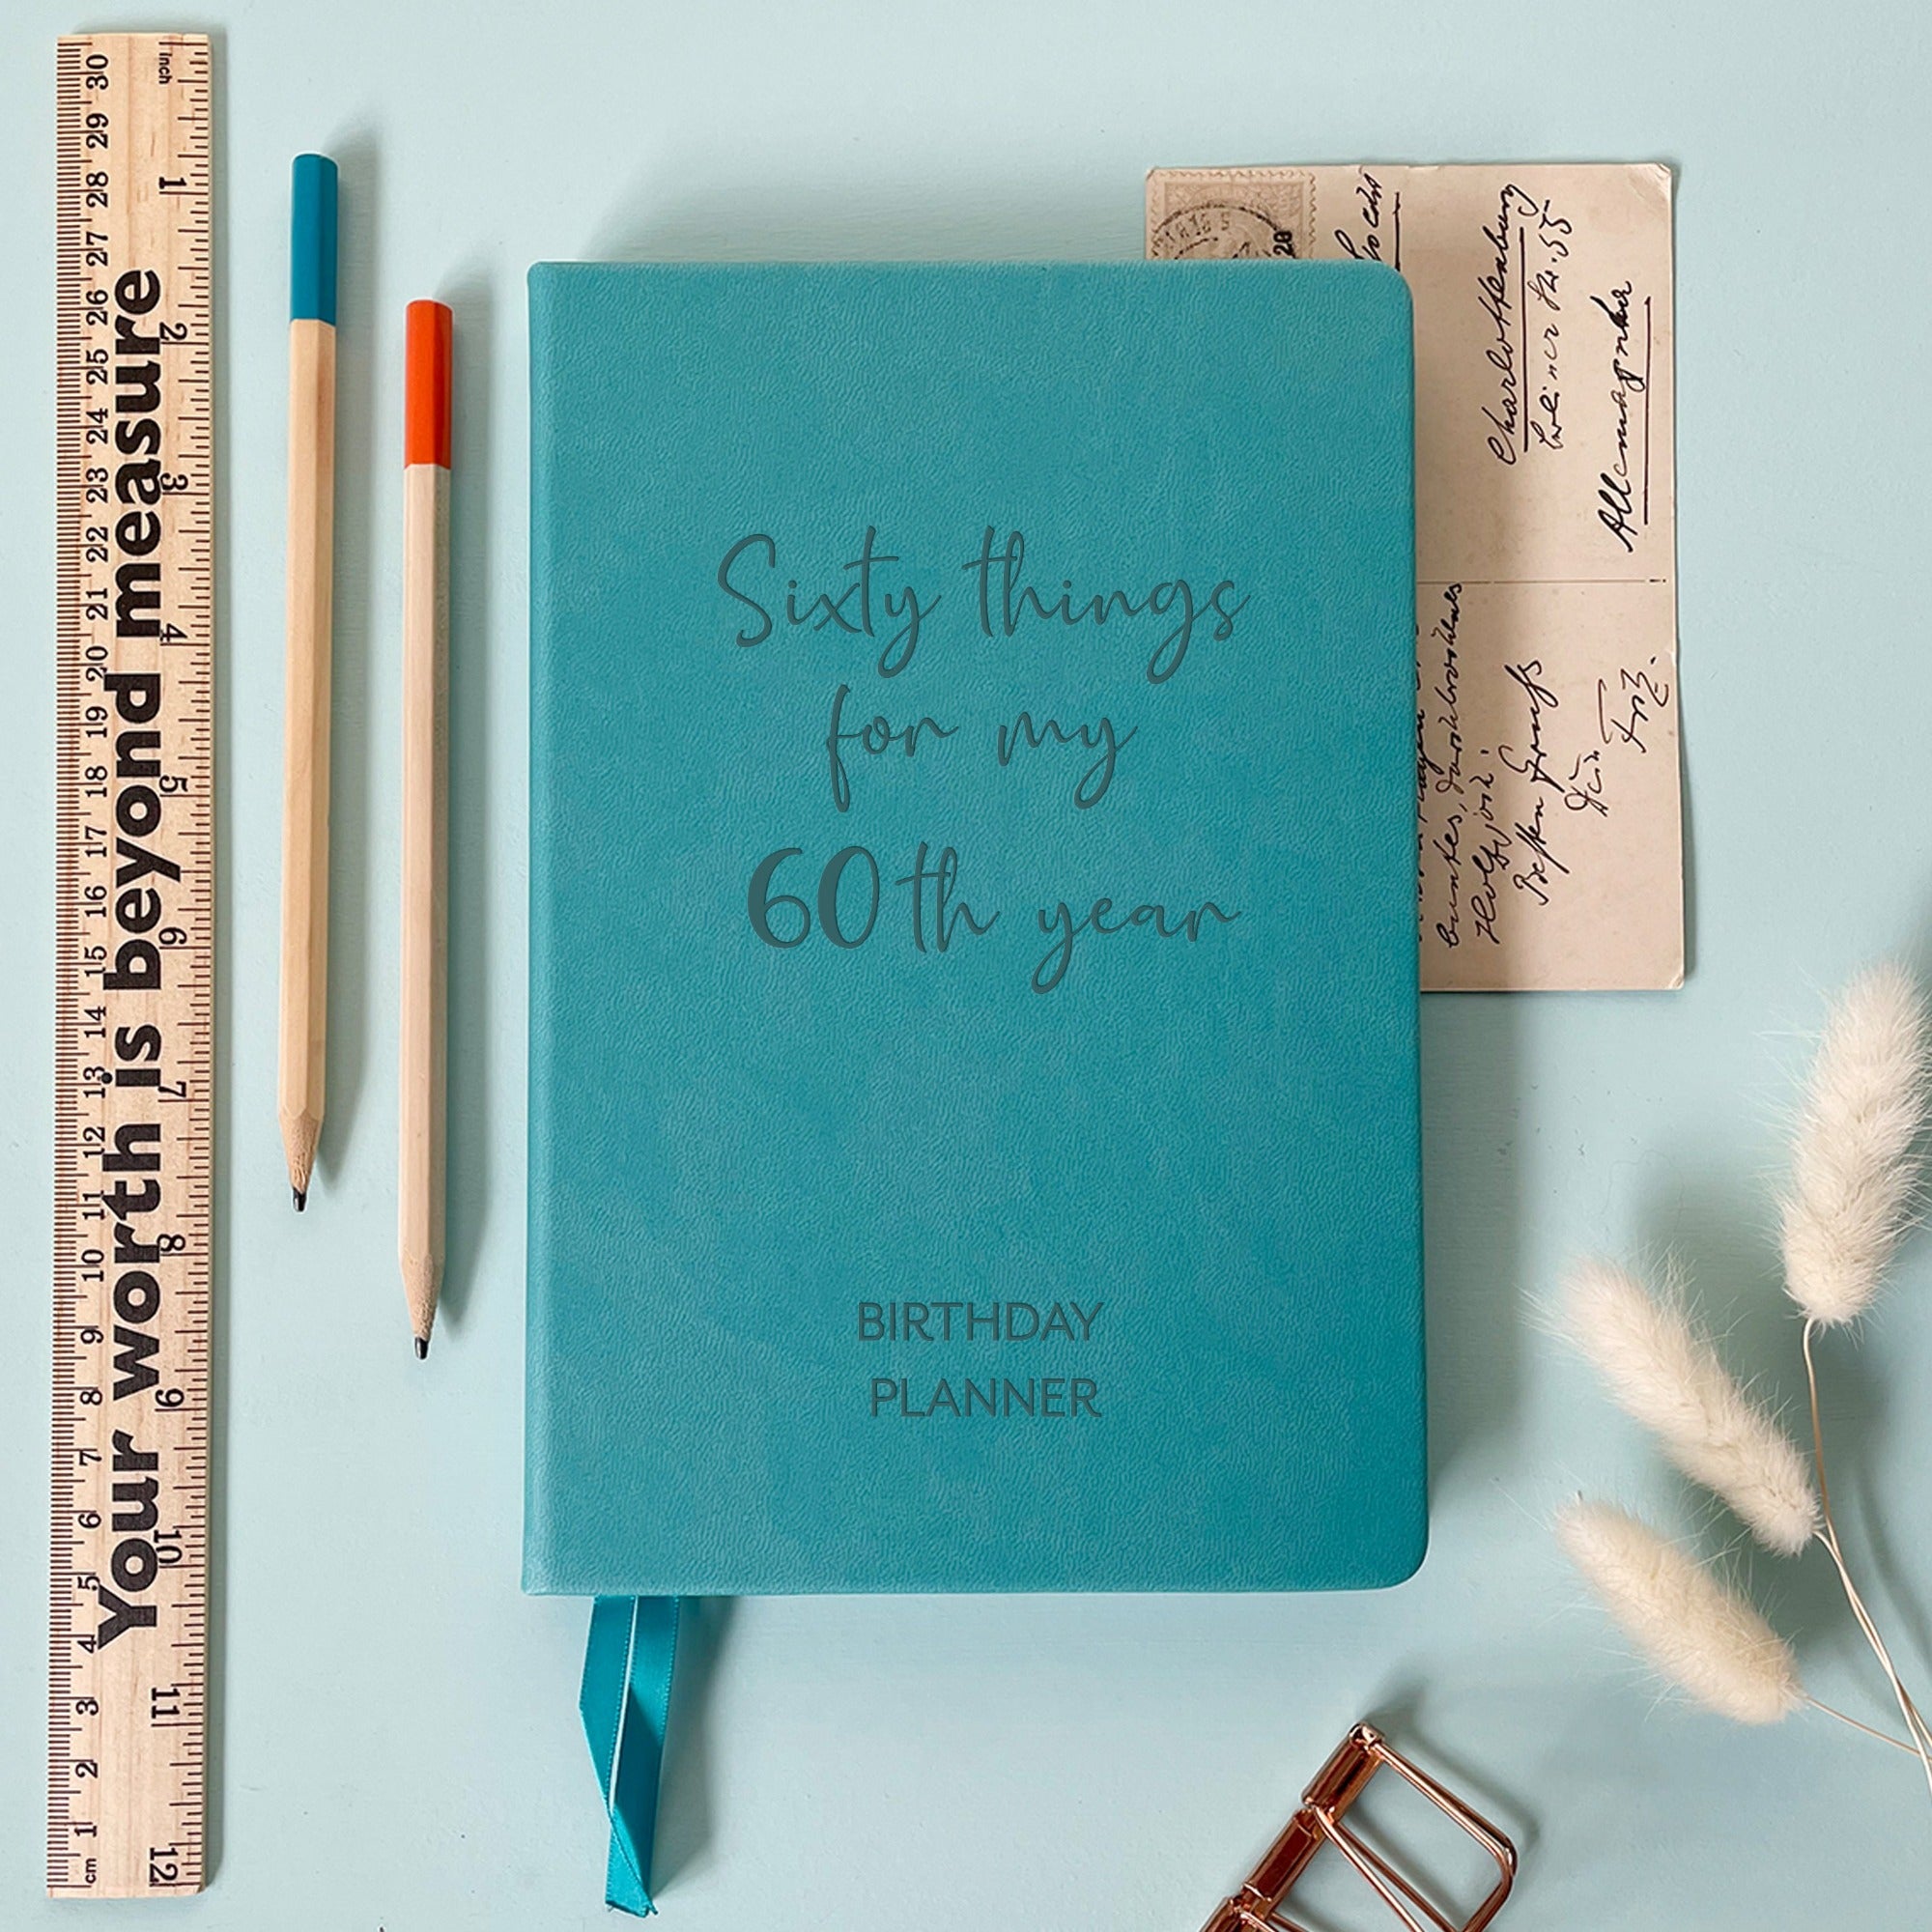 Pale blue Vegan leather notebook with personalised laser engraving on the cover saying sixty things for my 60th year